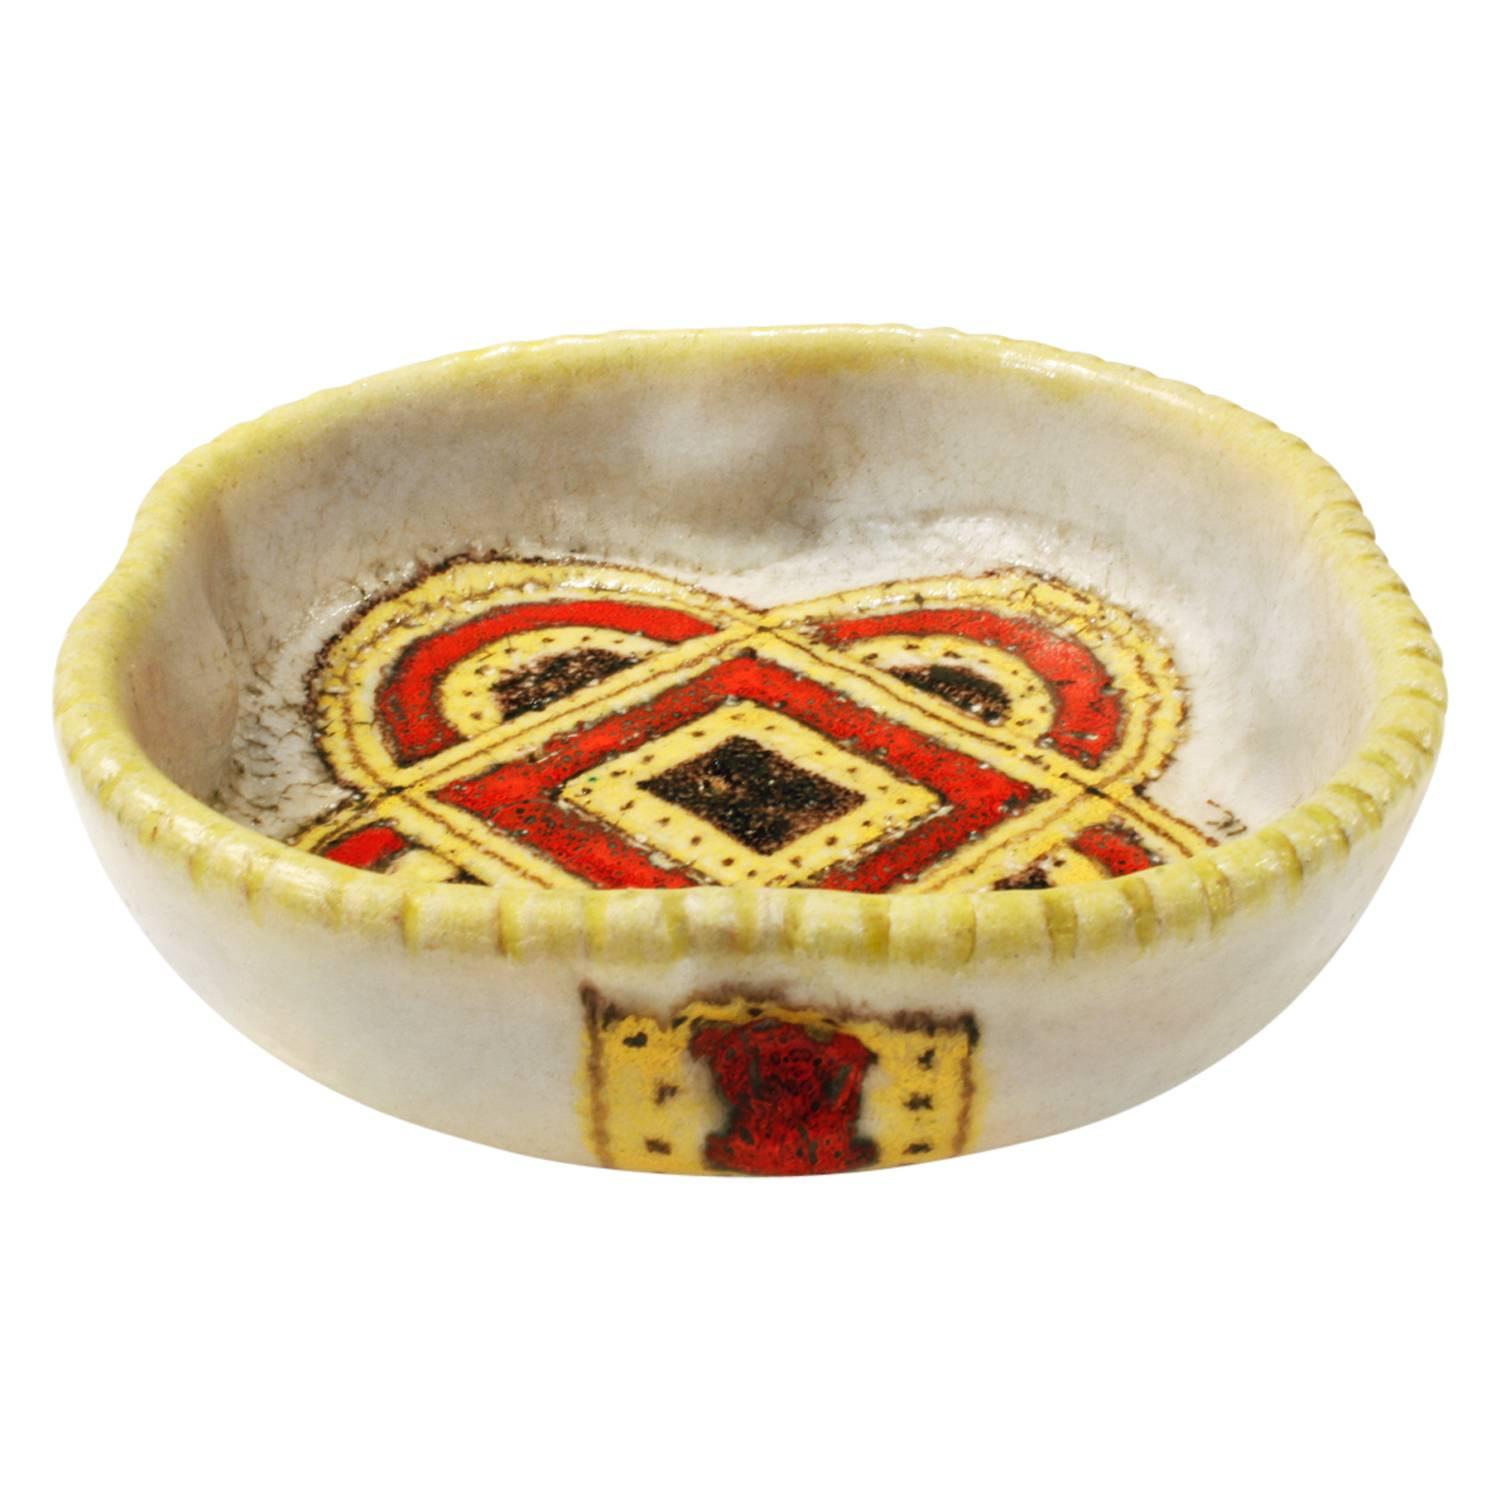 Studio made ceramic bowl with scalloped edges and colorful geometric design by Guido Gambone, Italy, 1950s (signed on bottom 